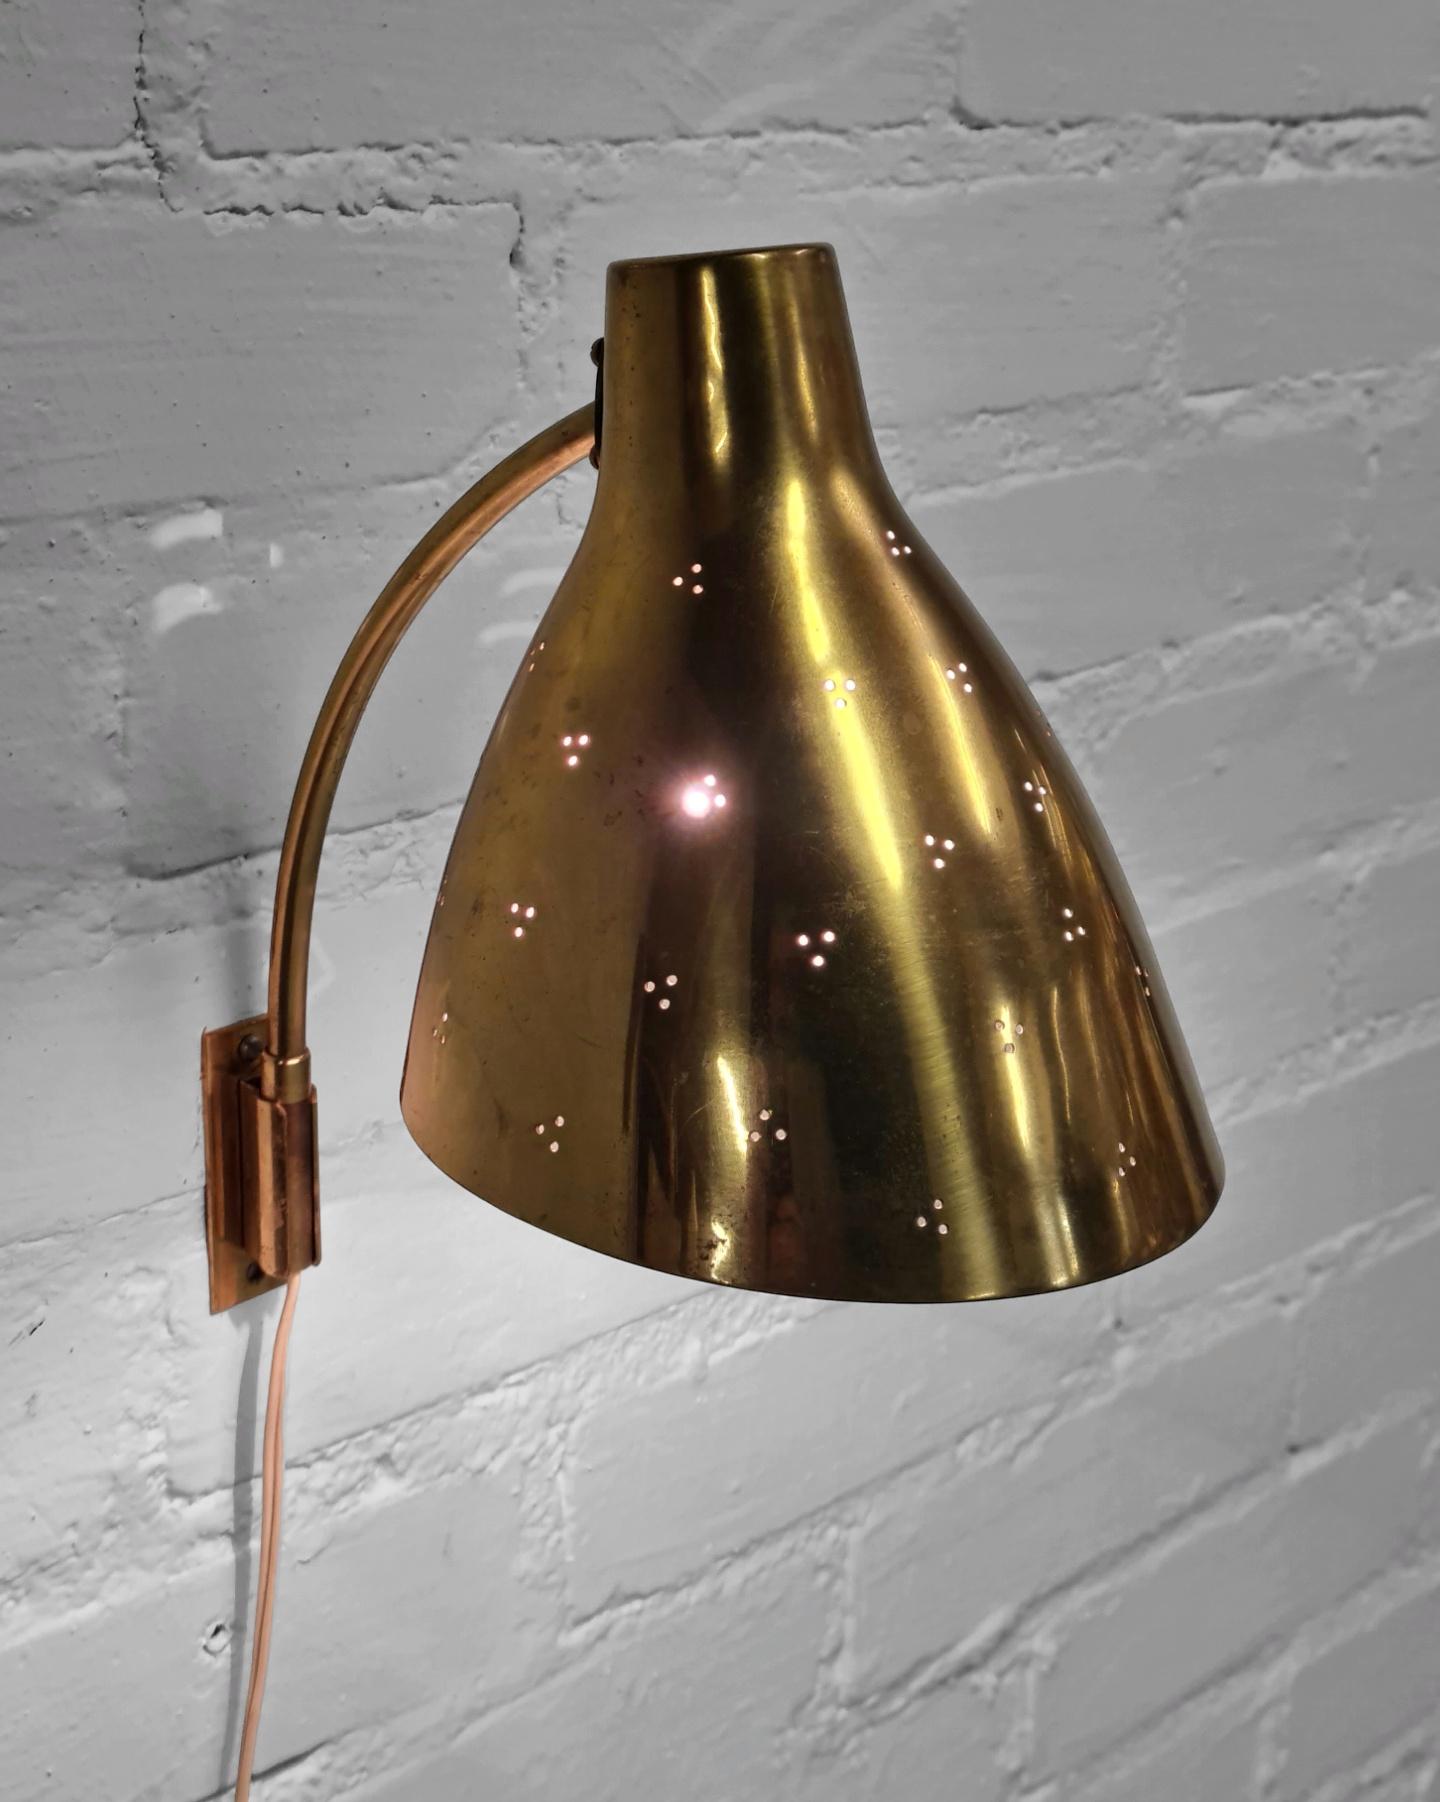 Lisa Johansson-Pape(1907-1989) was a Finnish designer best known for her works in lightings. she paid more attention to the function of the lamp firstly, then the design feature secondly.
Lisa designed furniture for Stockmann for a number of years,